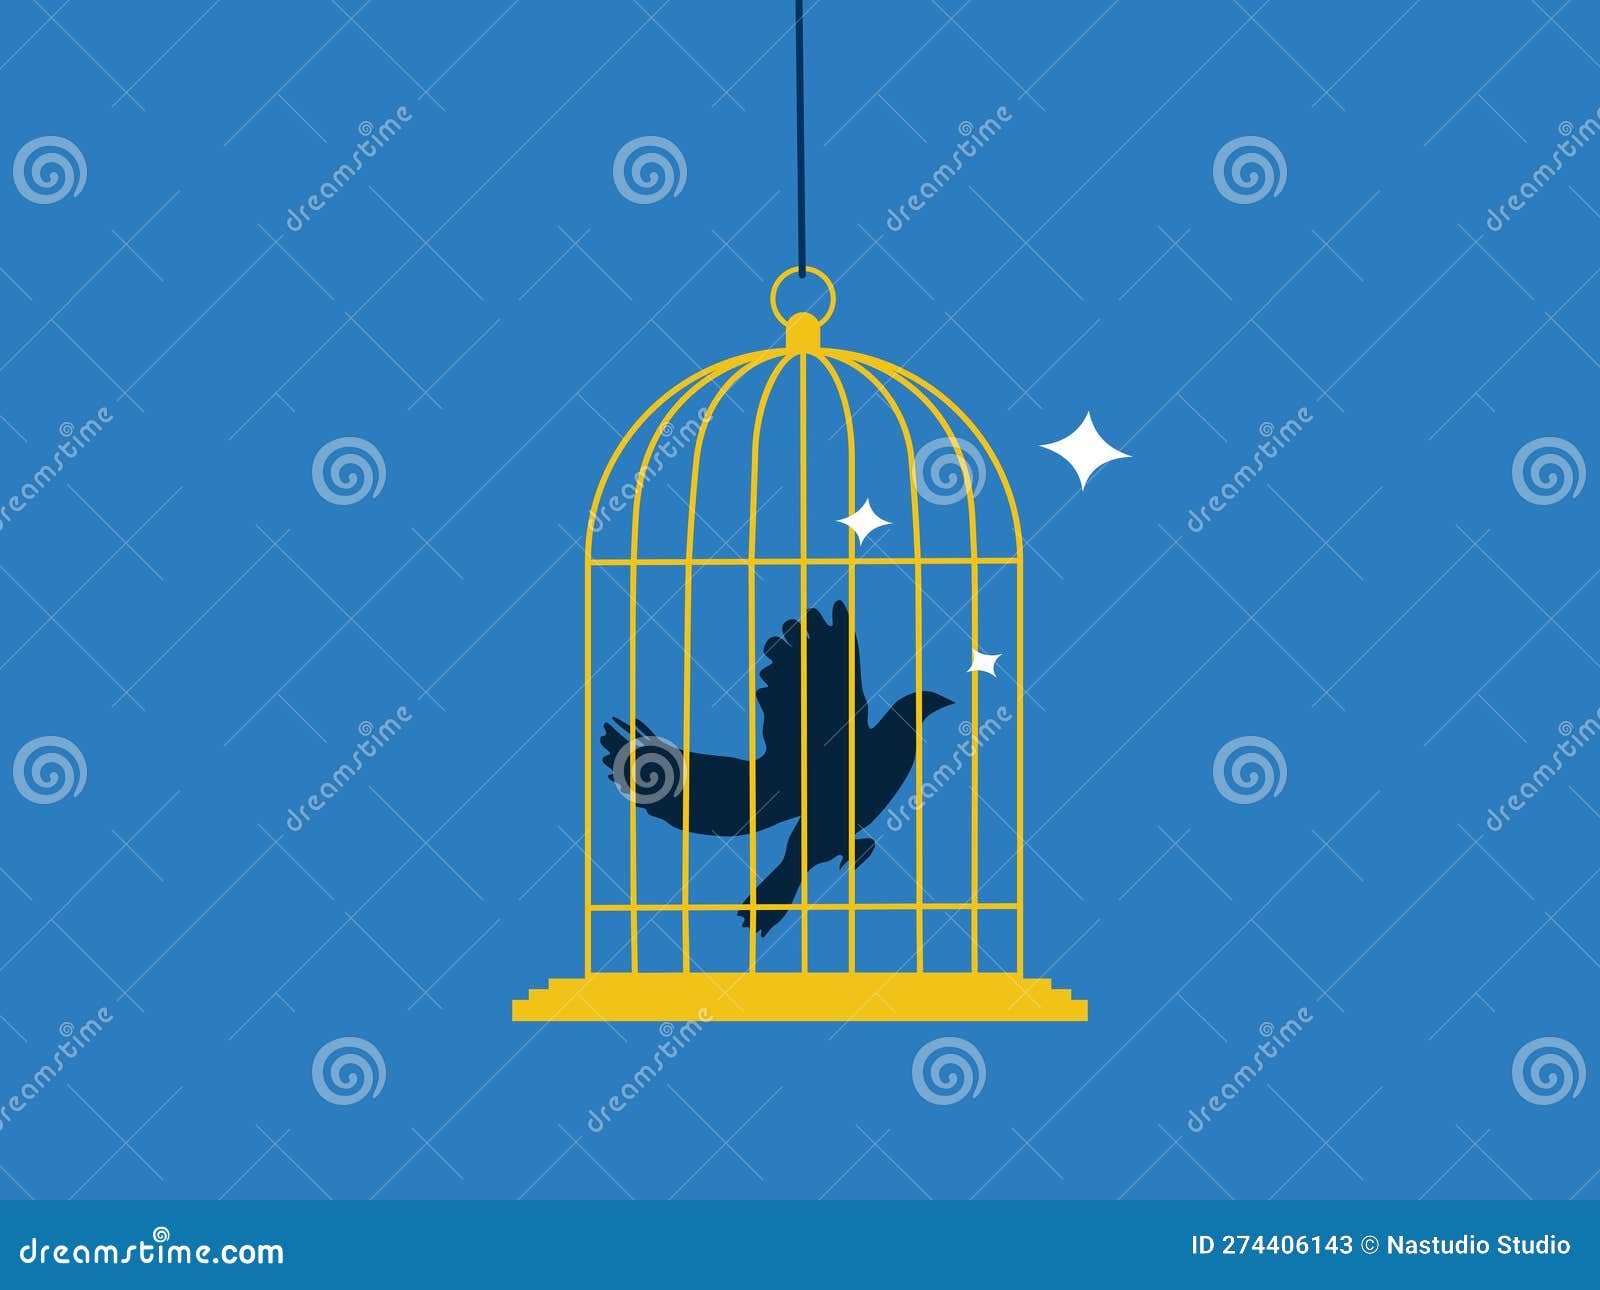 Bird Was Trapped in a Cage. Concept of Lack of Freedom and Imprisonment ...